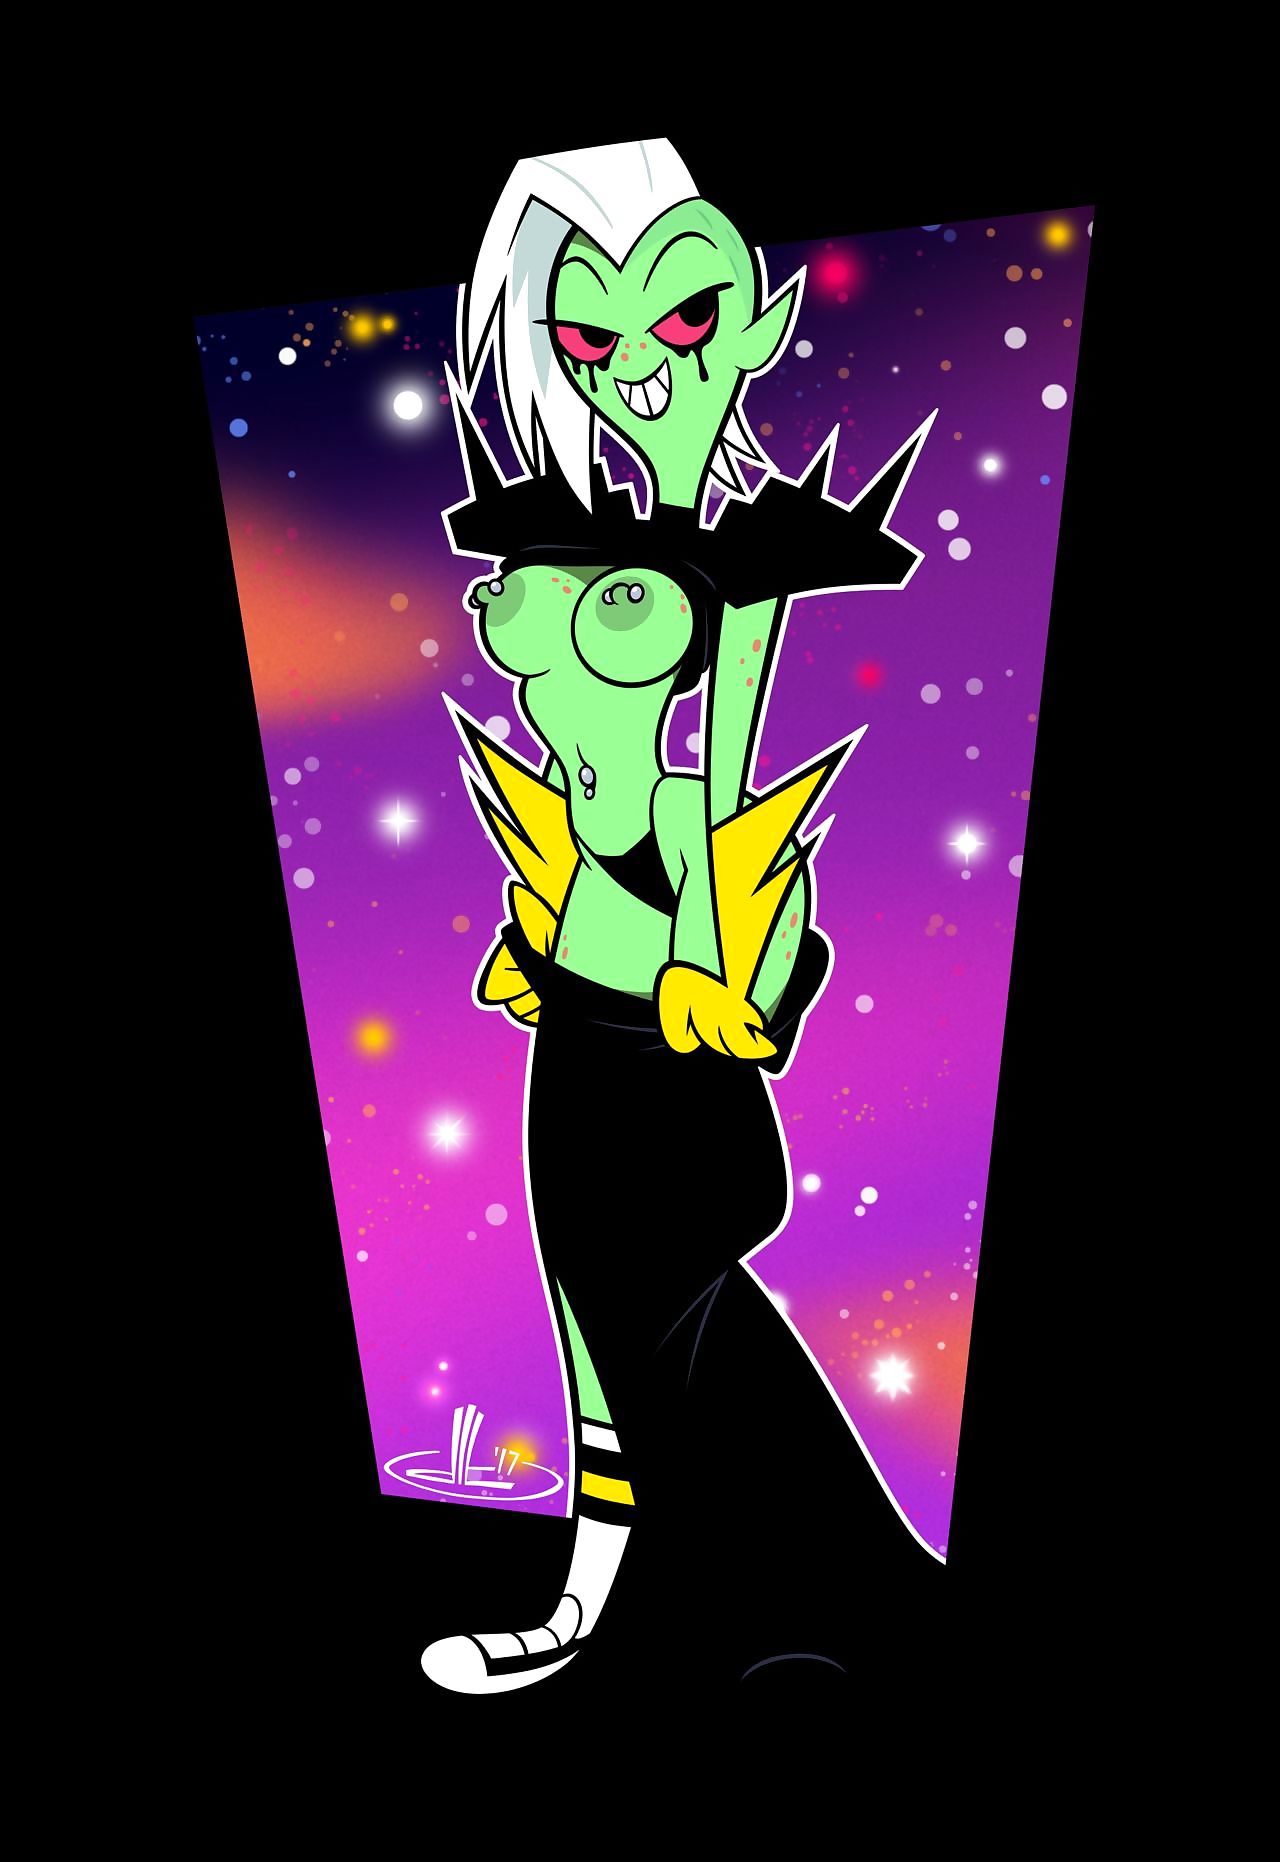 Lord Dominator collection - part 6